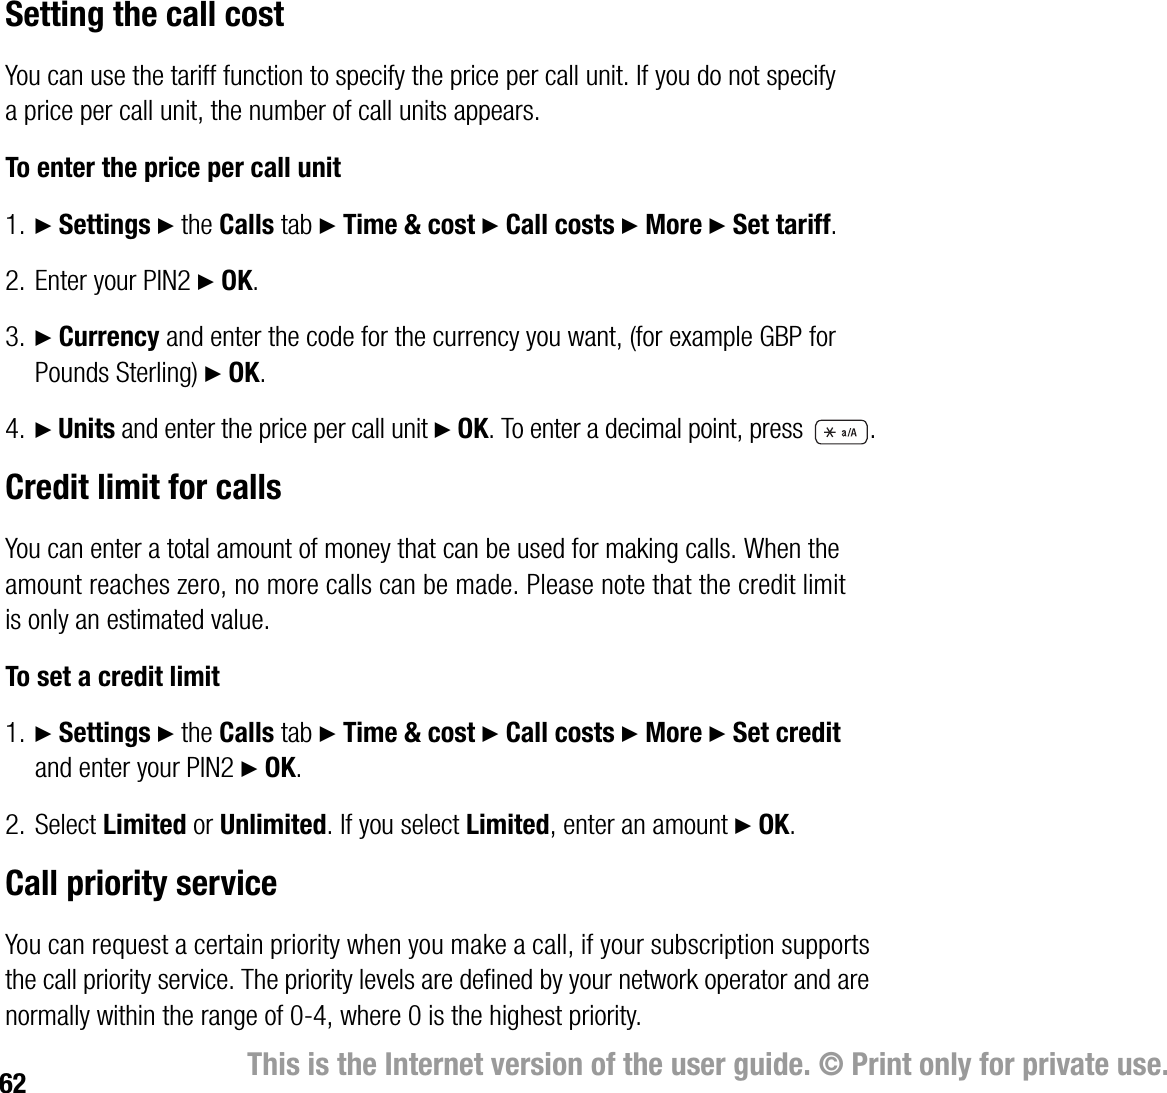 62 This is the Internet version of the user guide. © Print only for private use.Setting the call costYou can use the tariff function to specify the price per call unit. If you do not specify a price per call unit, the number of call units appears.To enter the price per call unit1. } Settings } the Calls tab } Time &amp; cost } Call costs } More } Set tariff. 2. Enter your PIN2 } OK.3. } Currency and enter the code for the currency you want, (for example GBP for Pounds Sterling) } OK.4. } Units and enter the price per call unit } OK. To enter a decimal point, press  .Credit limit for callsYou can enter a total amount of money that can be used for making calls. When the amount reaches zero, no more calls can be made. Please note that the credit limit is only an estimated value.To set a credit limit1. } Settings } the Calls tab } Time &amp; cost } Call costs } More } Set credit and enter your PIN2 } OK.2. Select Limited or Unlimited. If you select Limited, enter an amount } OK.Call priority serviceYou can request a certain priority when you make a call, if your subscription supports the call priority service. The priority levels are defined by your network operator and are normally within the range of 04, where 0 is the highest priority.